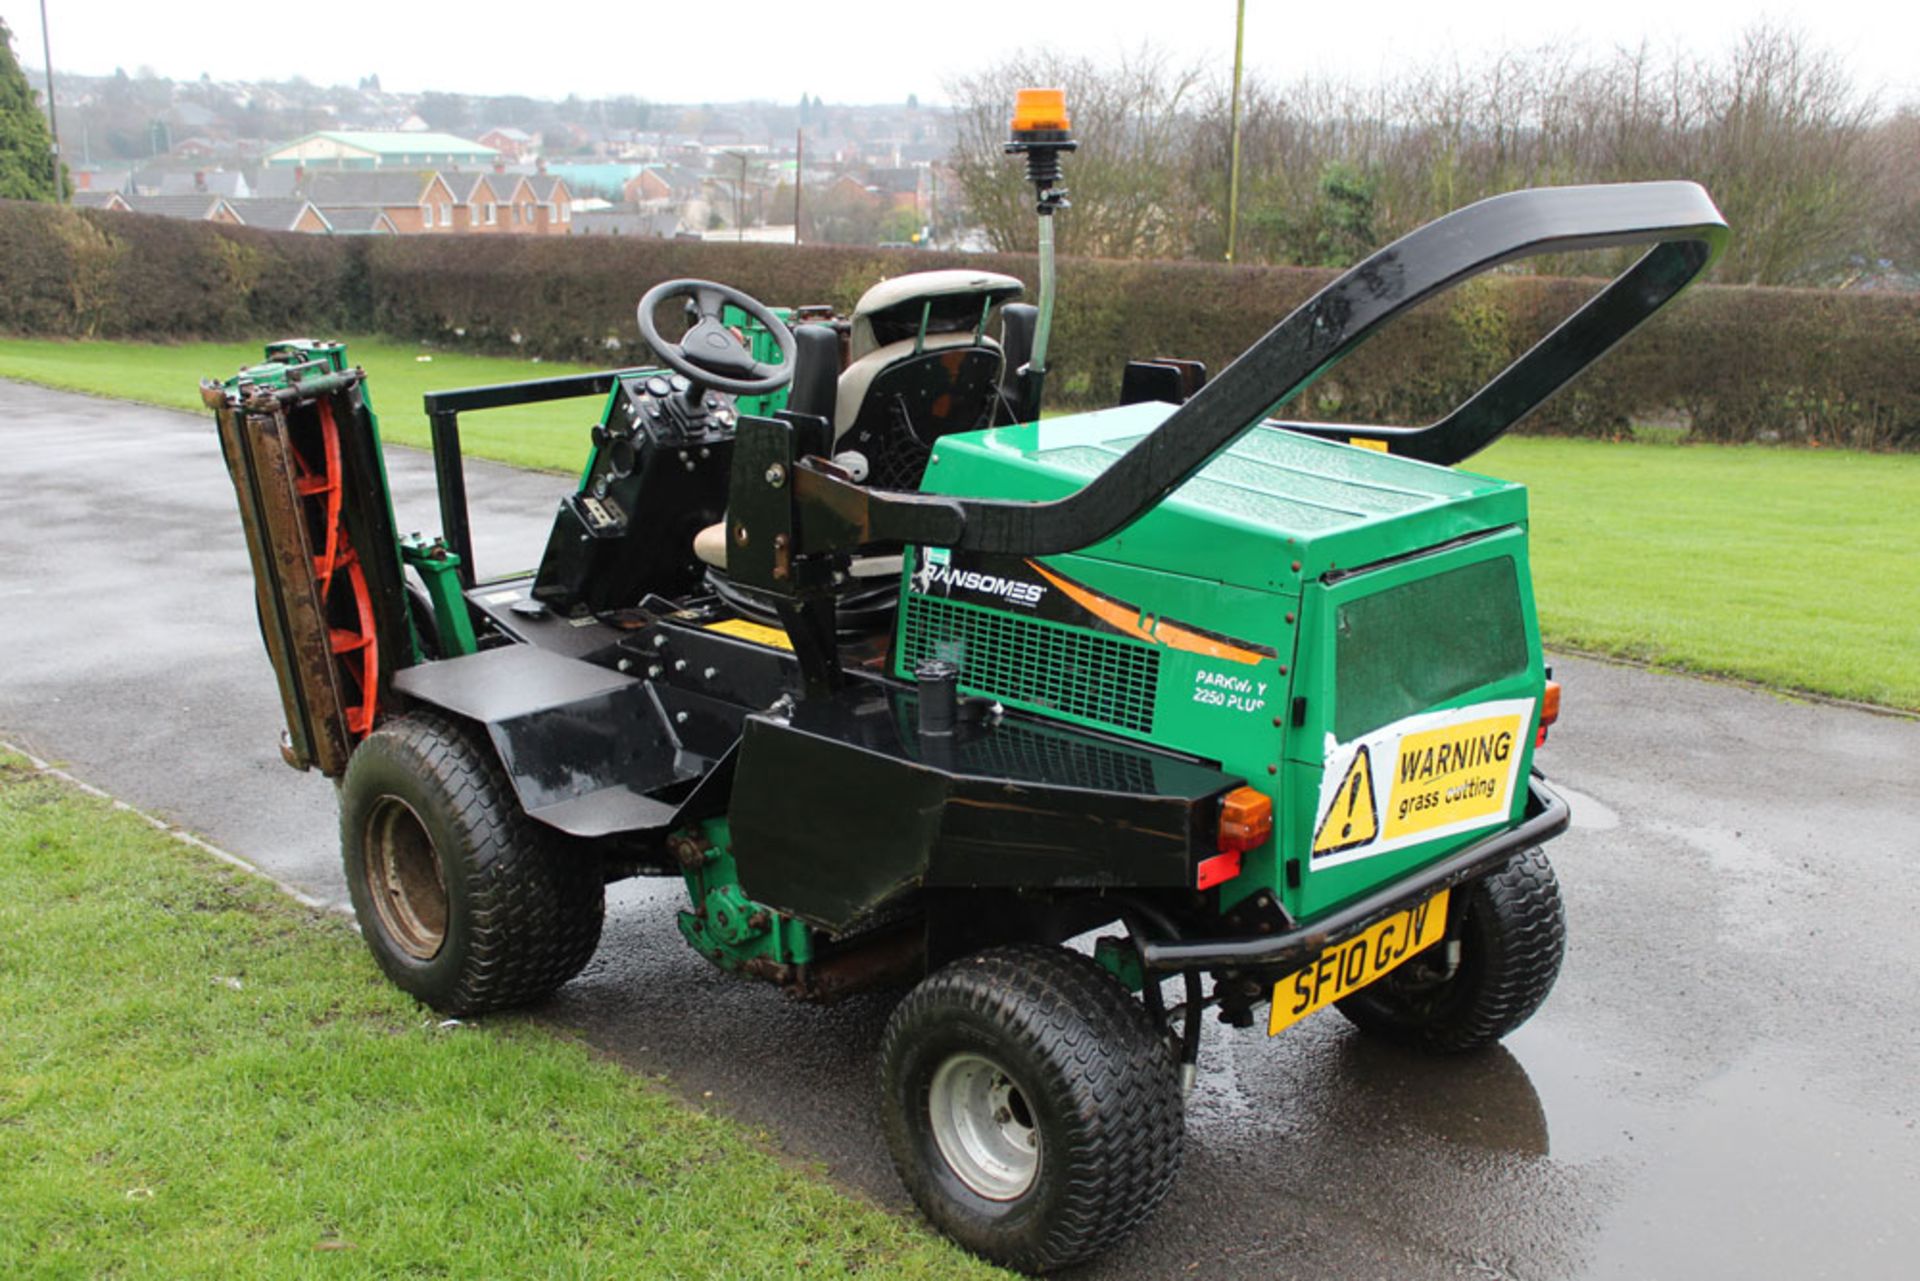 2010 Ransomes Parkway 2250 Plus Ride On Cylinder Mower - Image 6 of 8